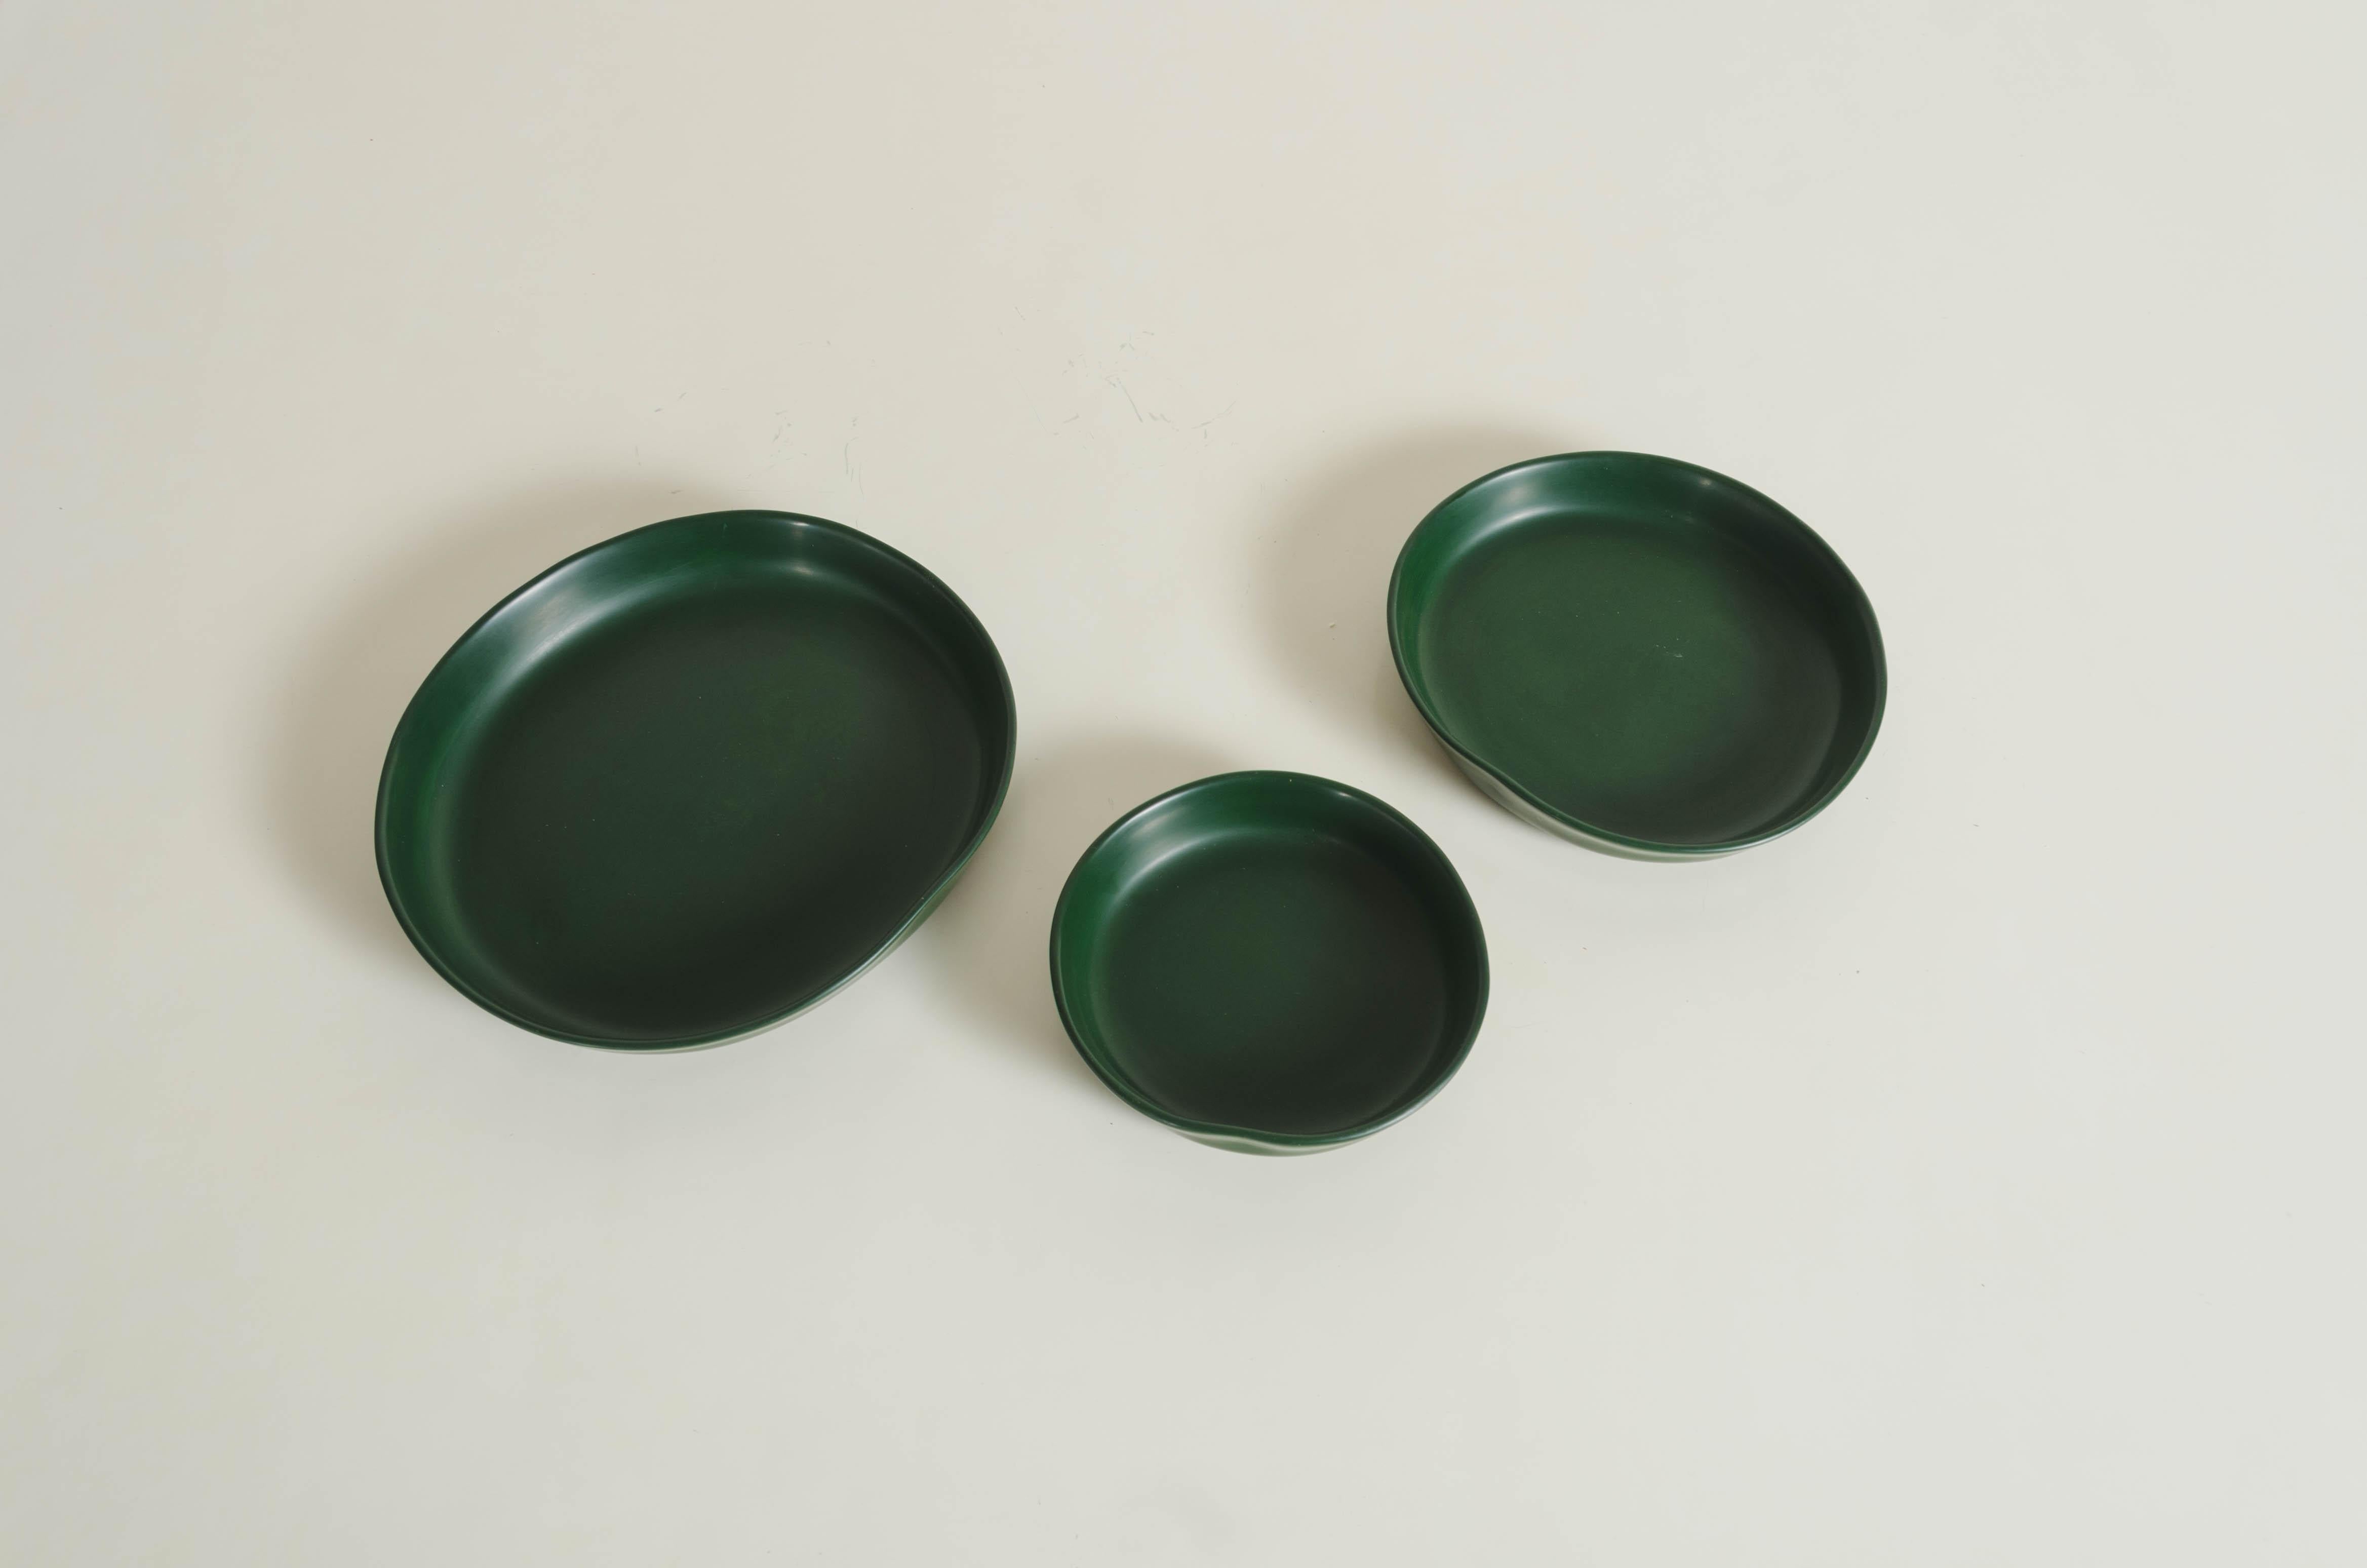 Round plates (set of 3)
Green lacquer
Handmade
Limited edition
Measures: Small 6